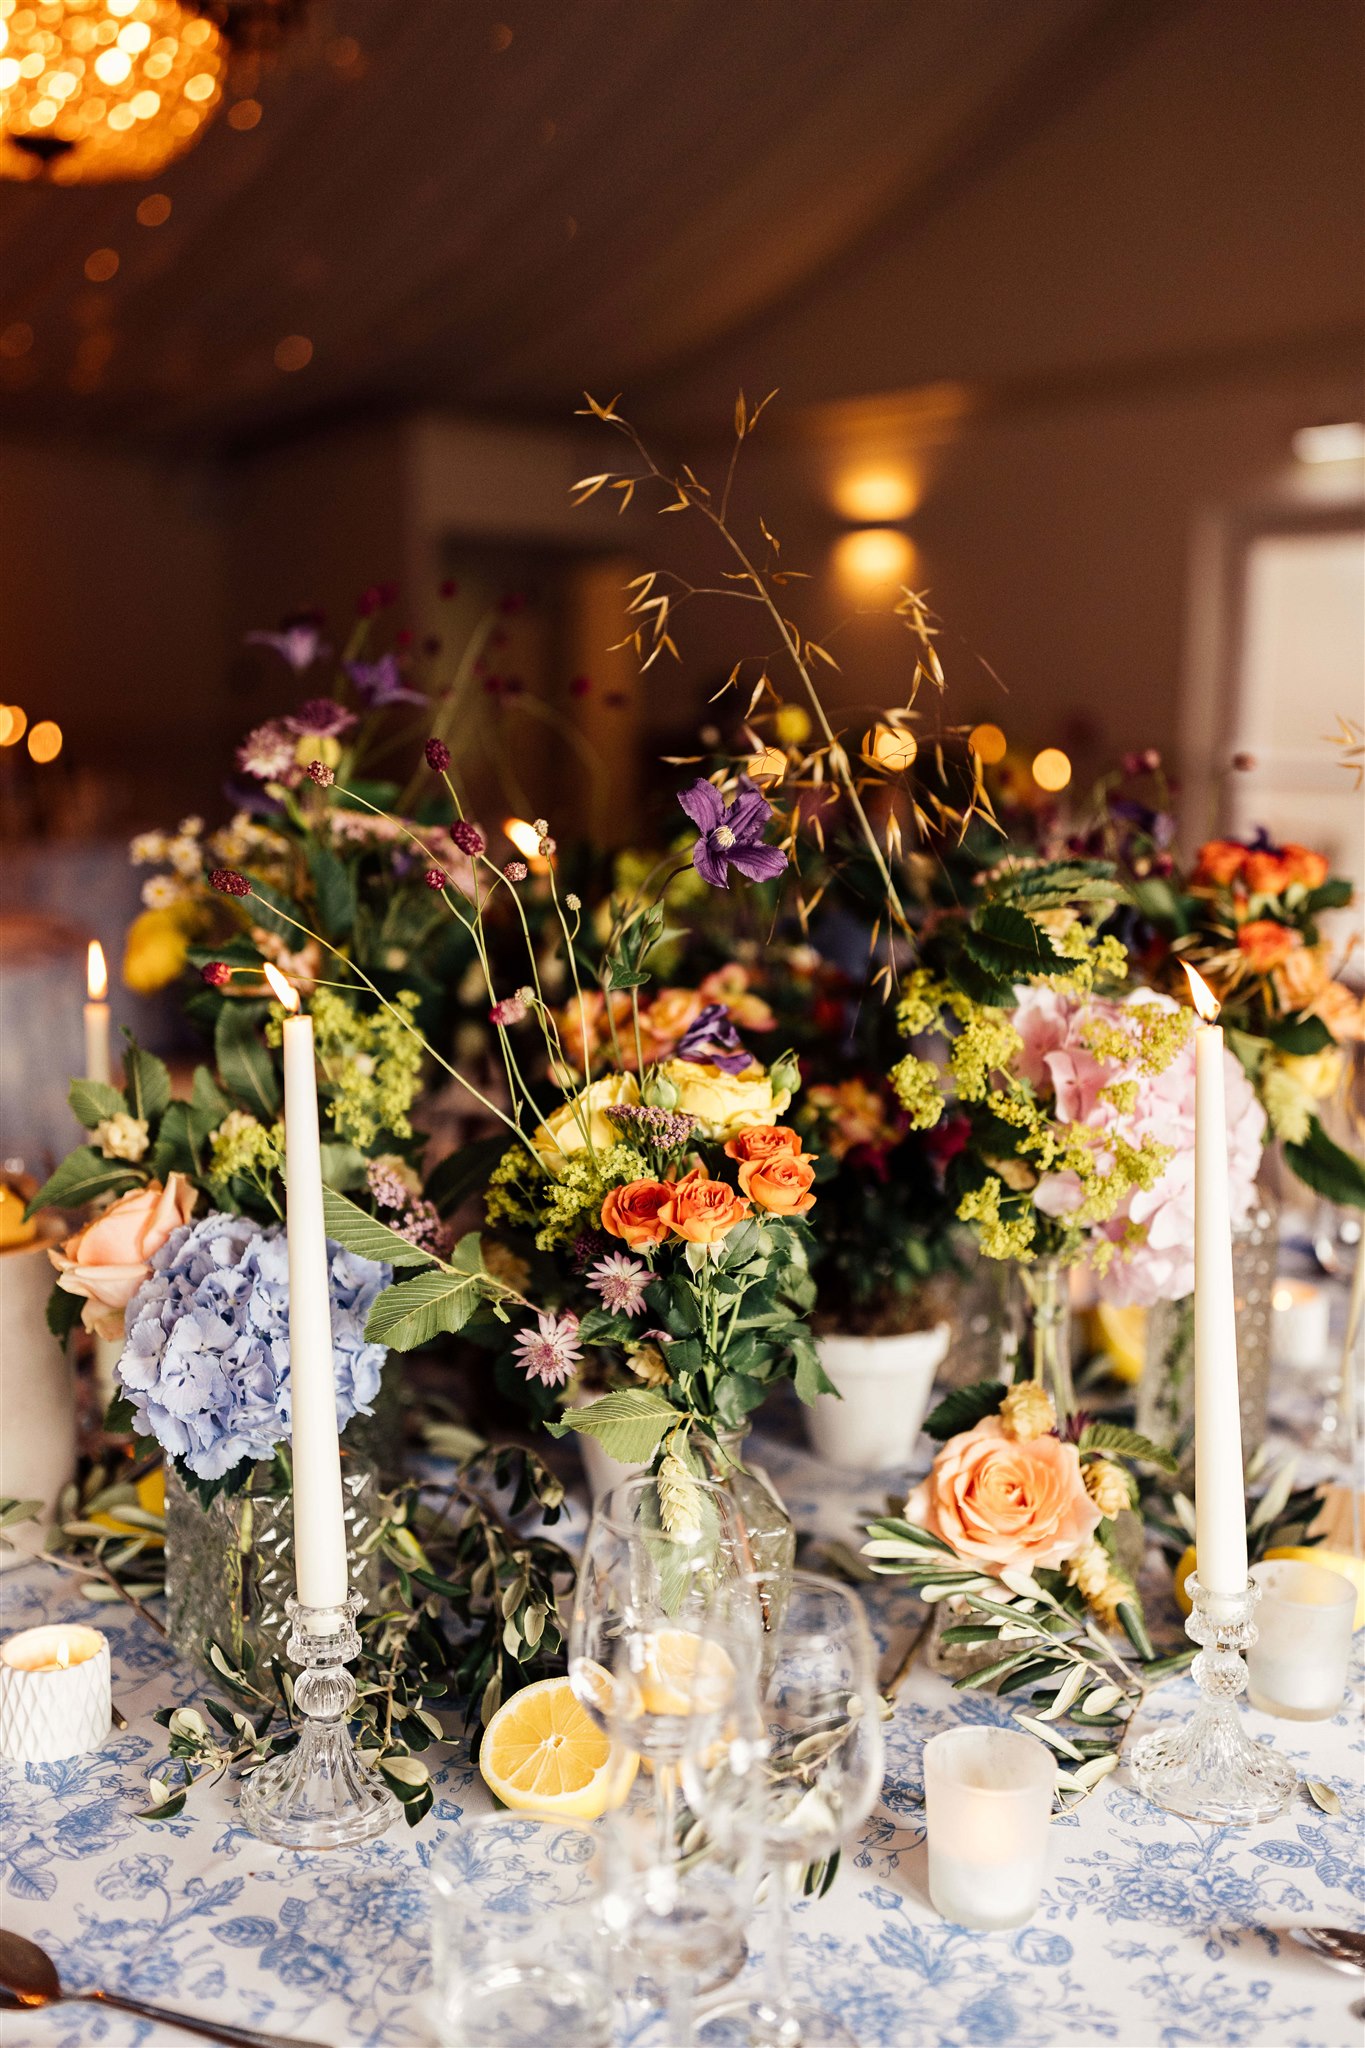 A table filled with floral arrangements filled with green foliage and pink, blue and lilac tones set on a blue toile tablecloth on which are more flowers and cream lit candles.